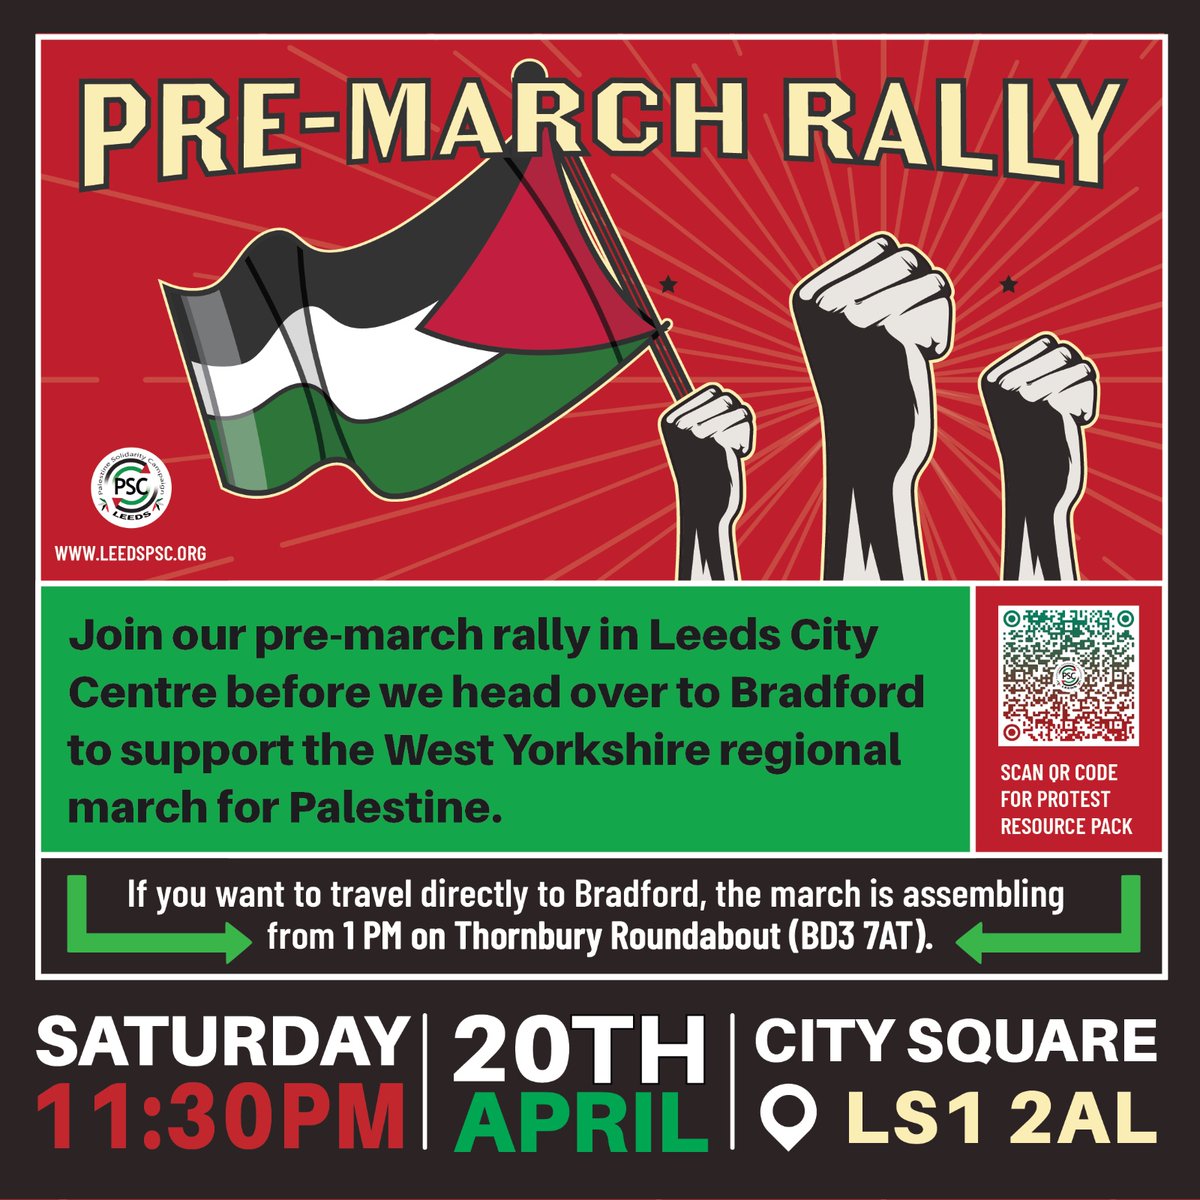 This Saturday, due to the annual Vaisakhi parade hosted by the Sikh community in Leeds City Centre at our usual time, Leeds PSC will not be organising a demo in Leeds. Instead, we will join the West Yorkshire regional march for Palestine in Bradford.